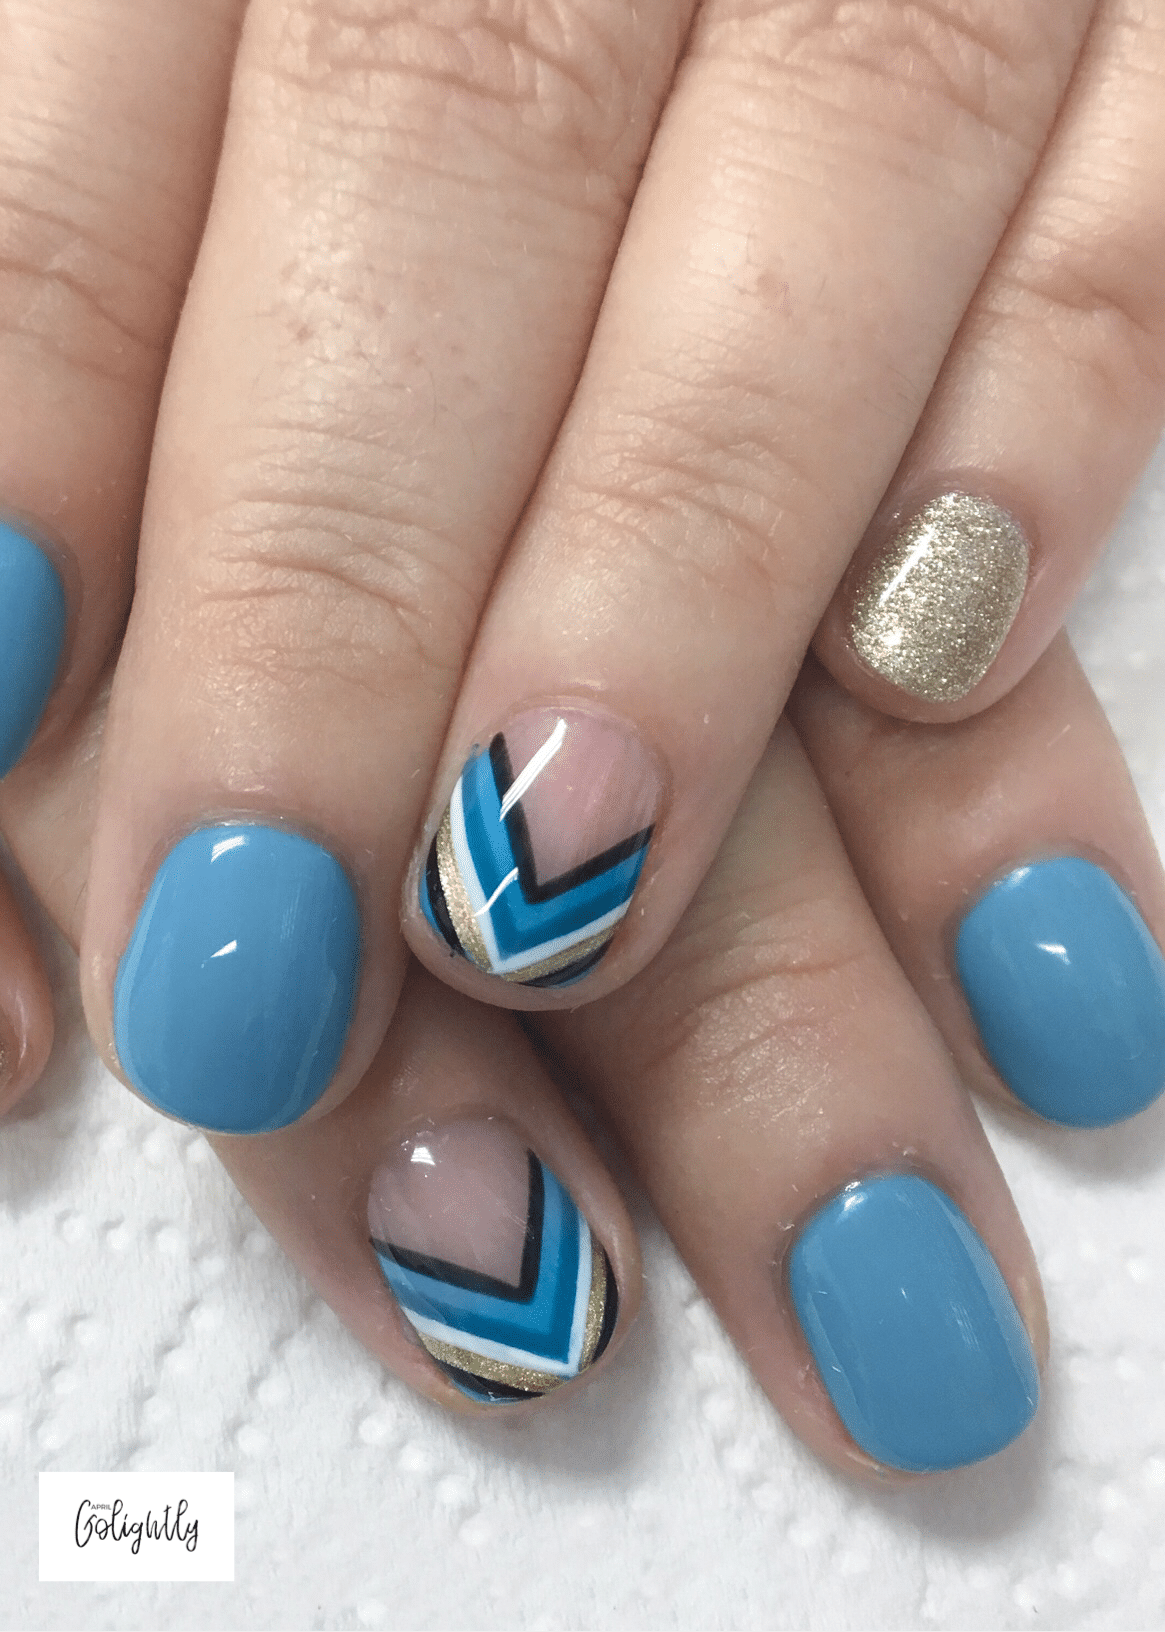 Teal Fall Nail Art Designs chevron with gold and black and white with negative space - french manicure